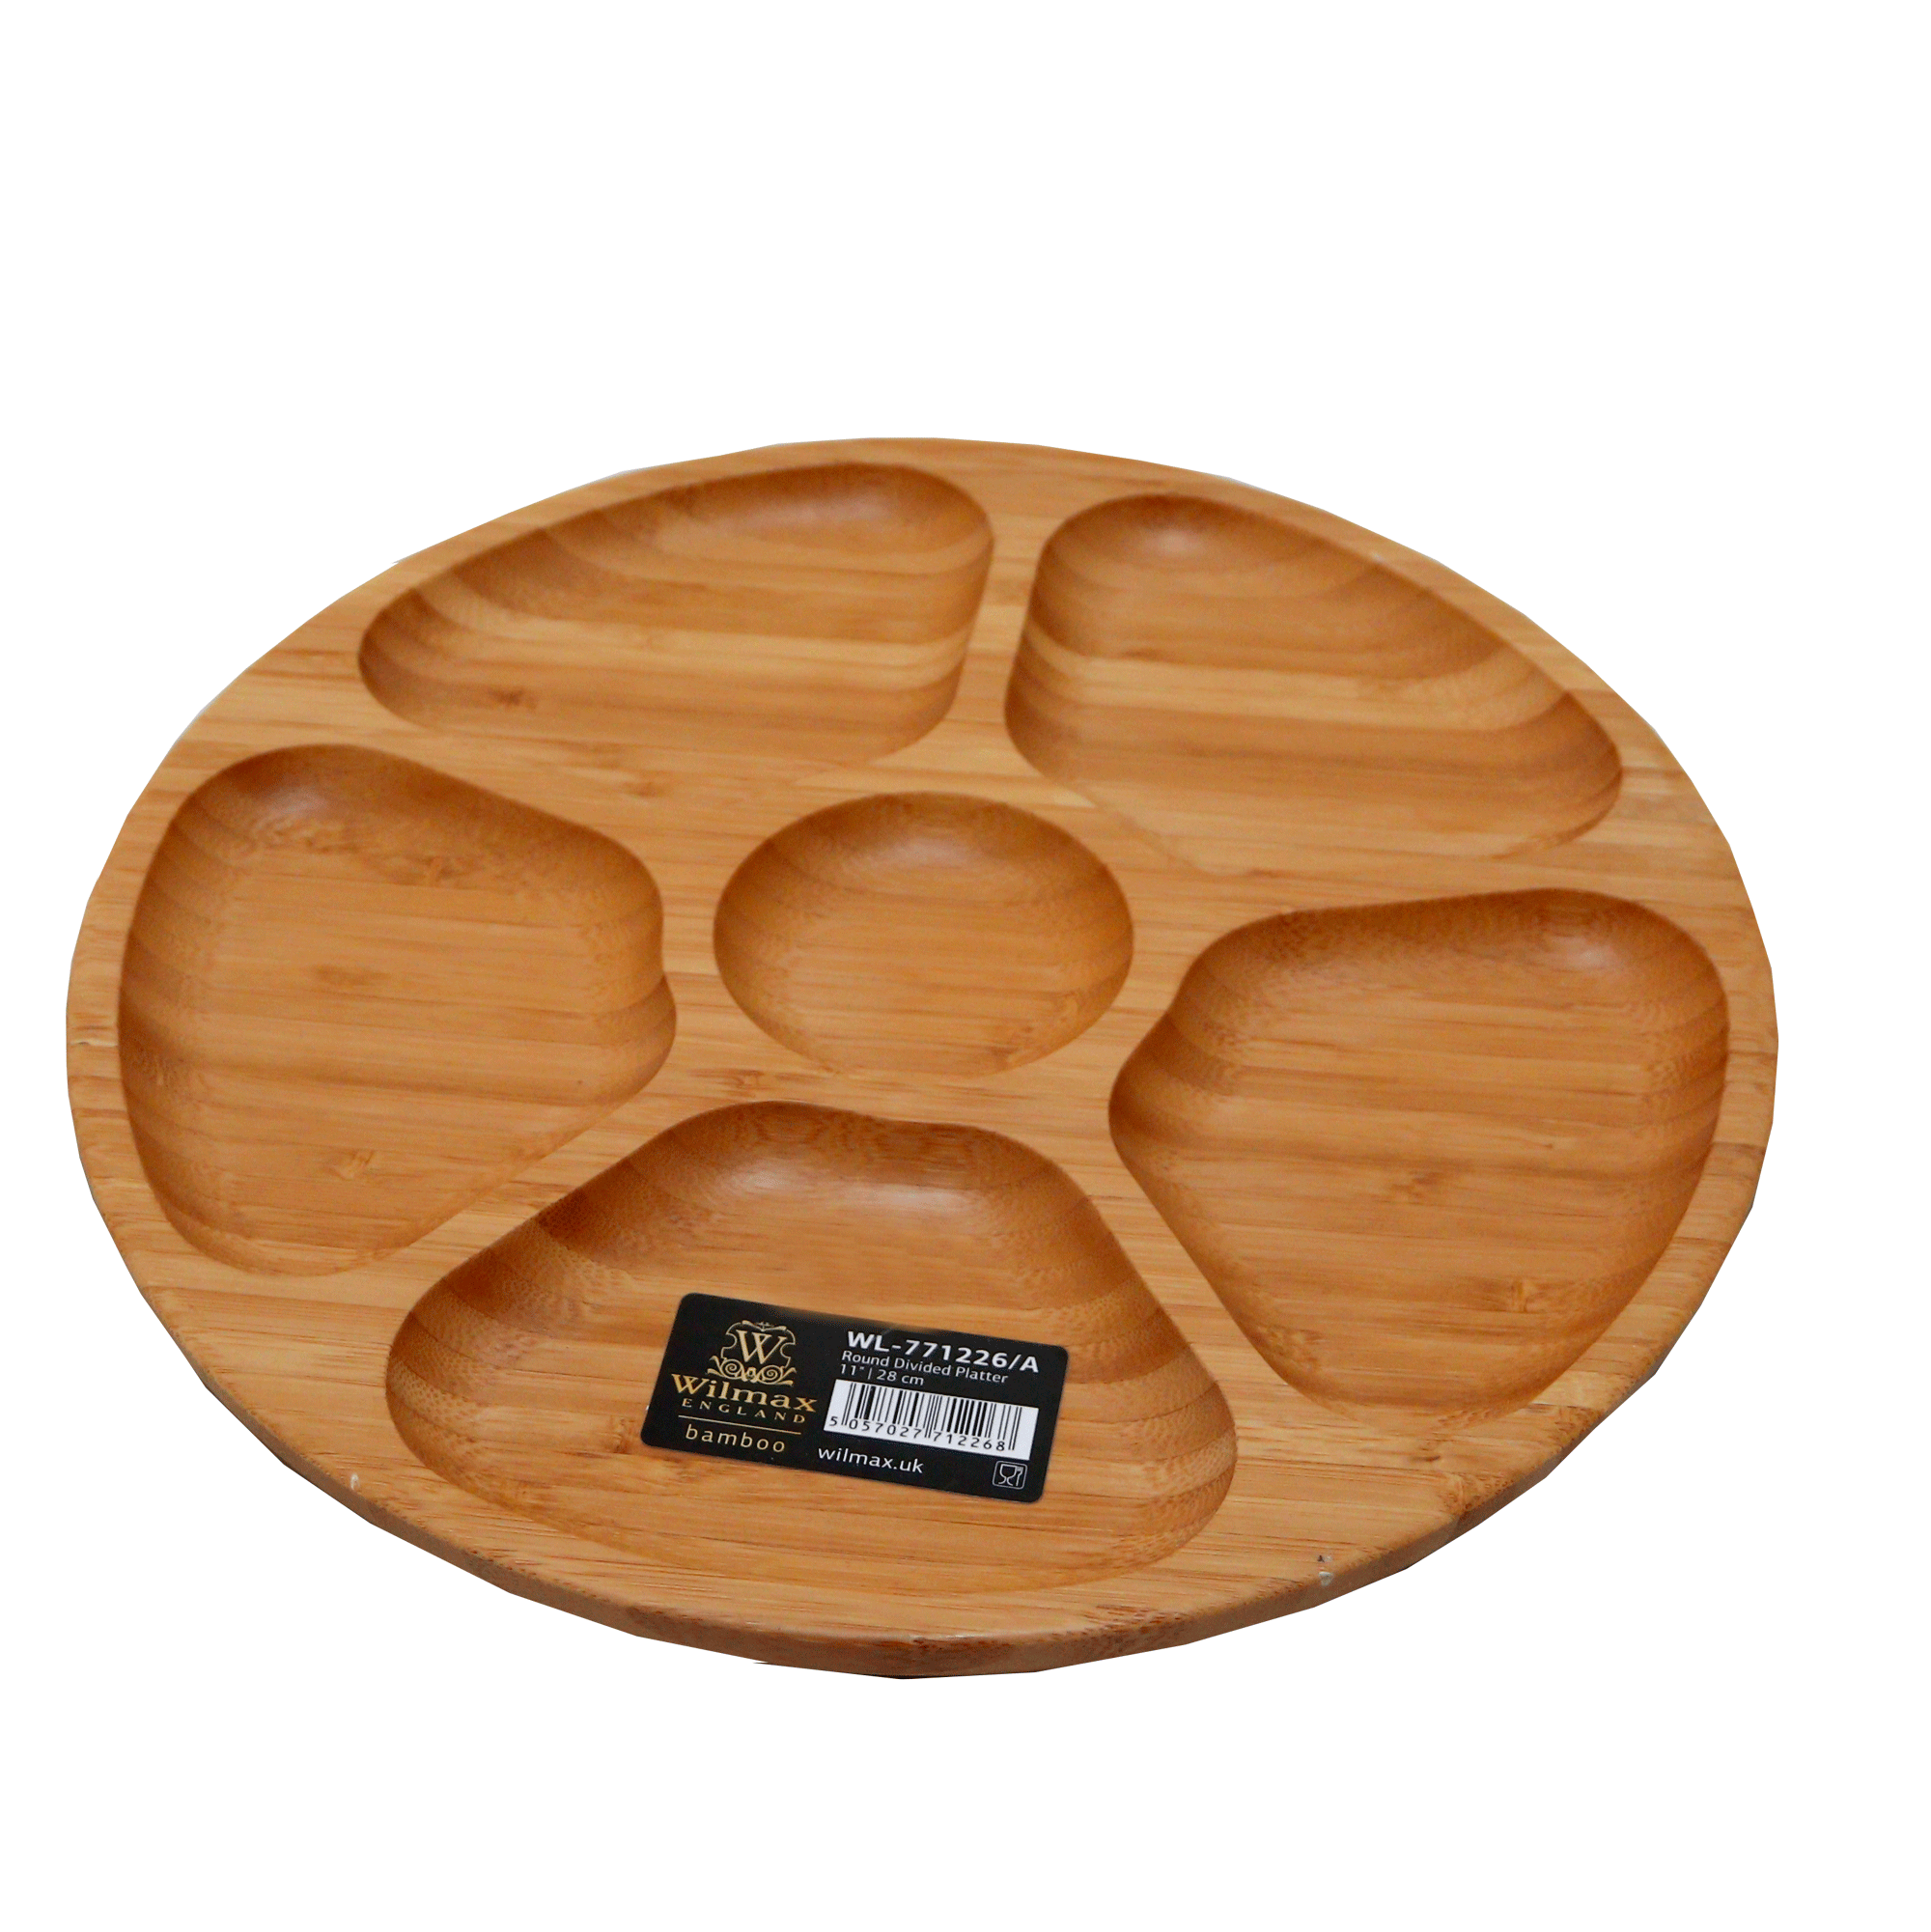 Round Divided Platter Wilmax 7117-3 771226/A 